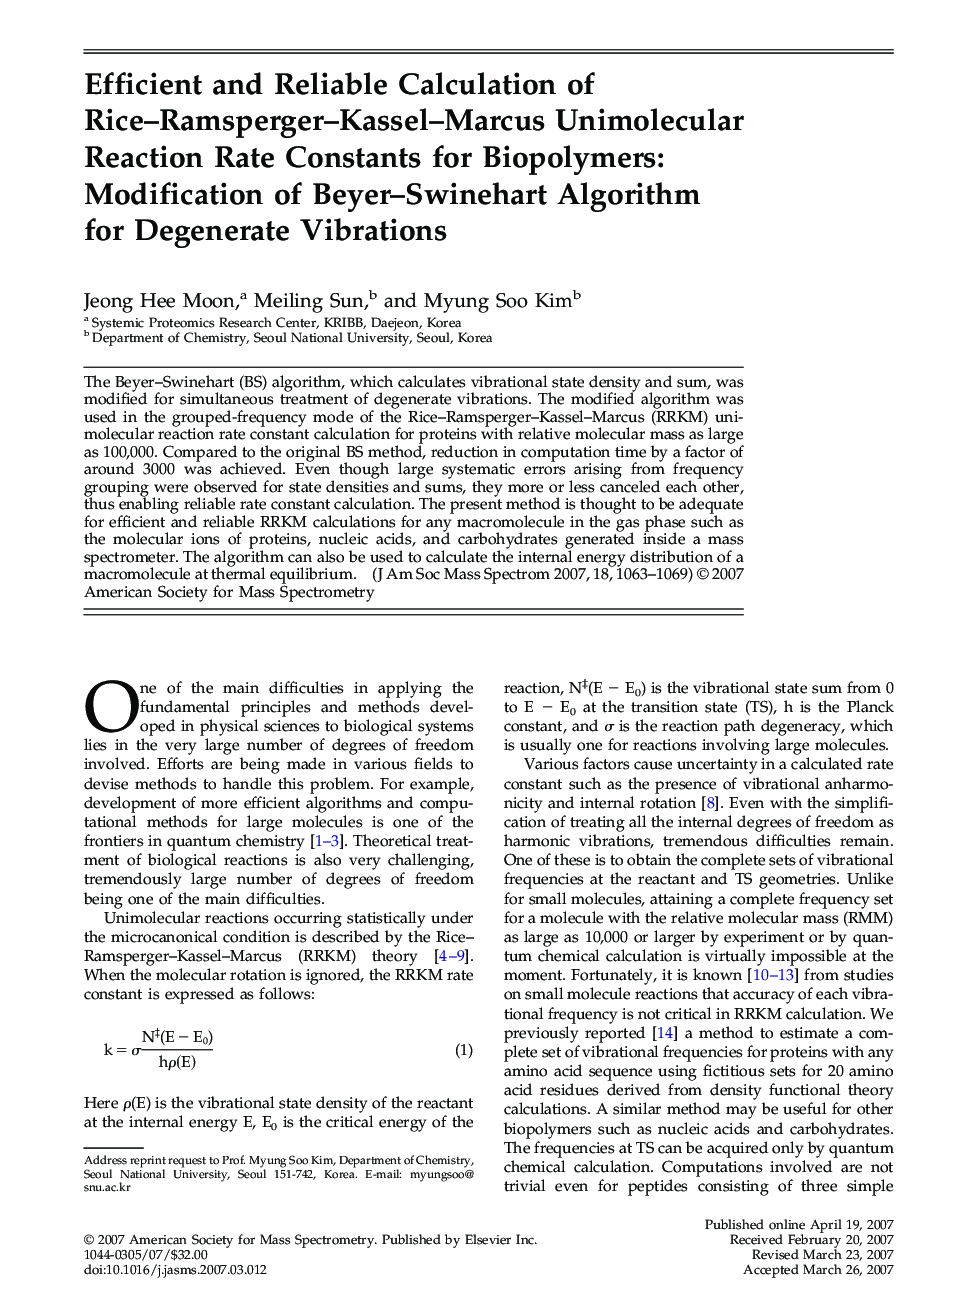 Efficient and Reliable Calculation of Rice–Ramsperger–Kassel–Marcus Unimolecular Reaction Rate Constants for Biopolymers: Modification of Beyer–Swinehart Algorithm for Degenerate Vibrations 